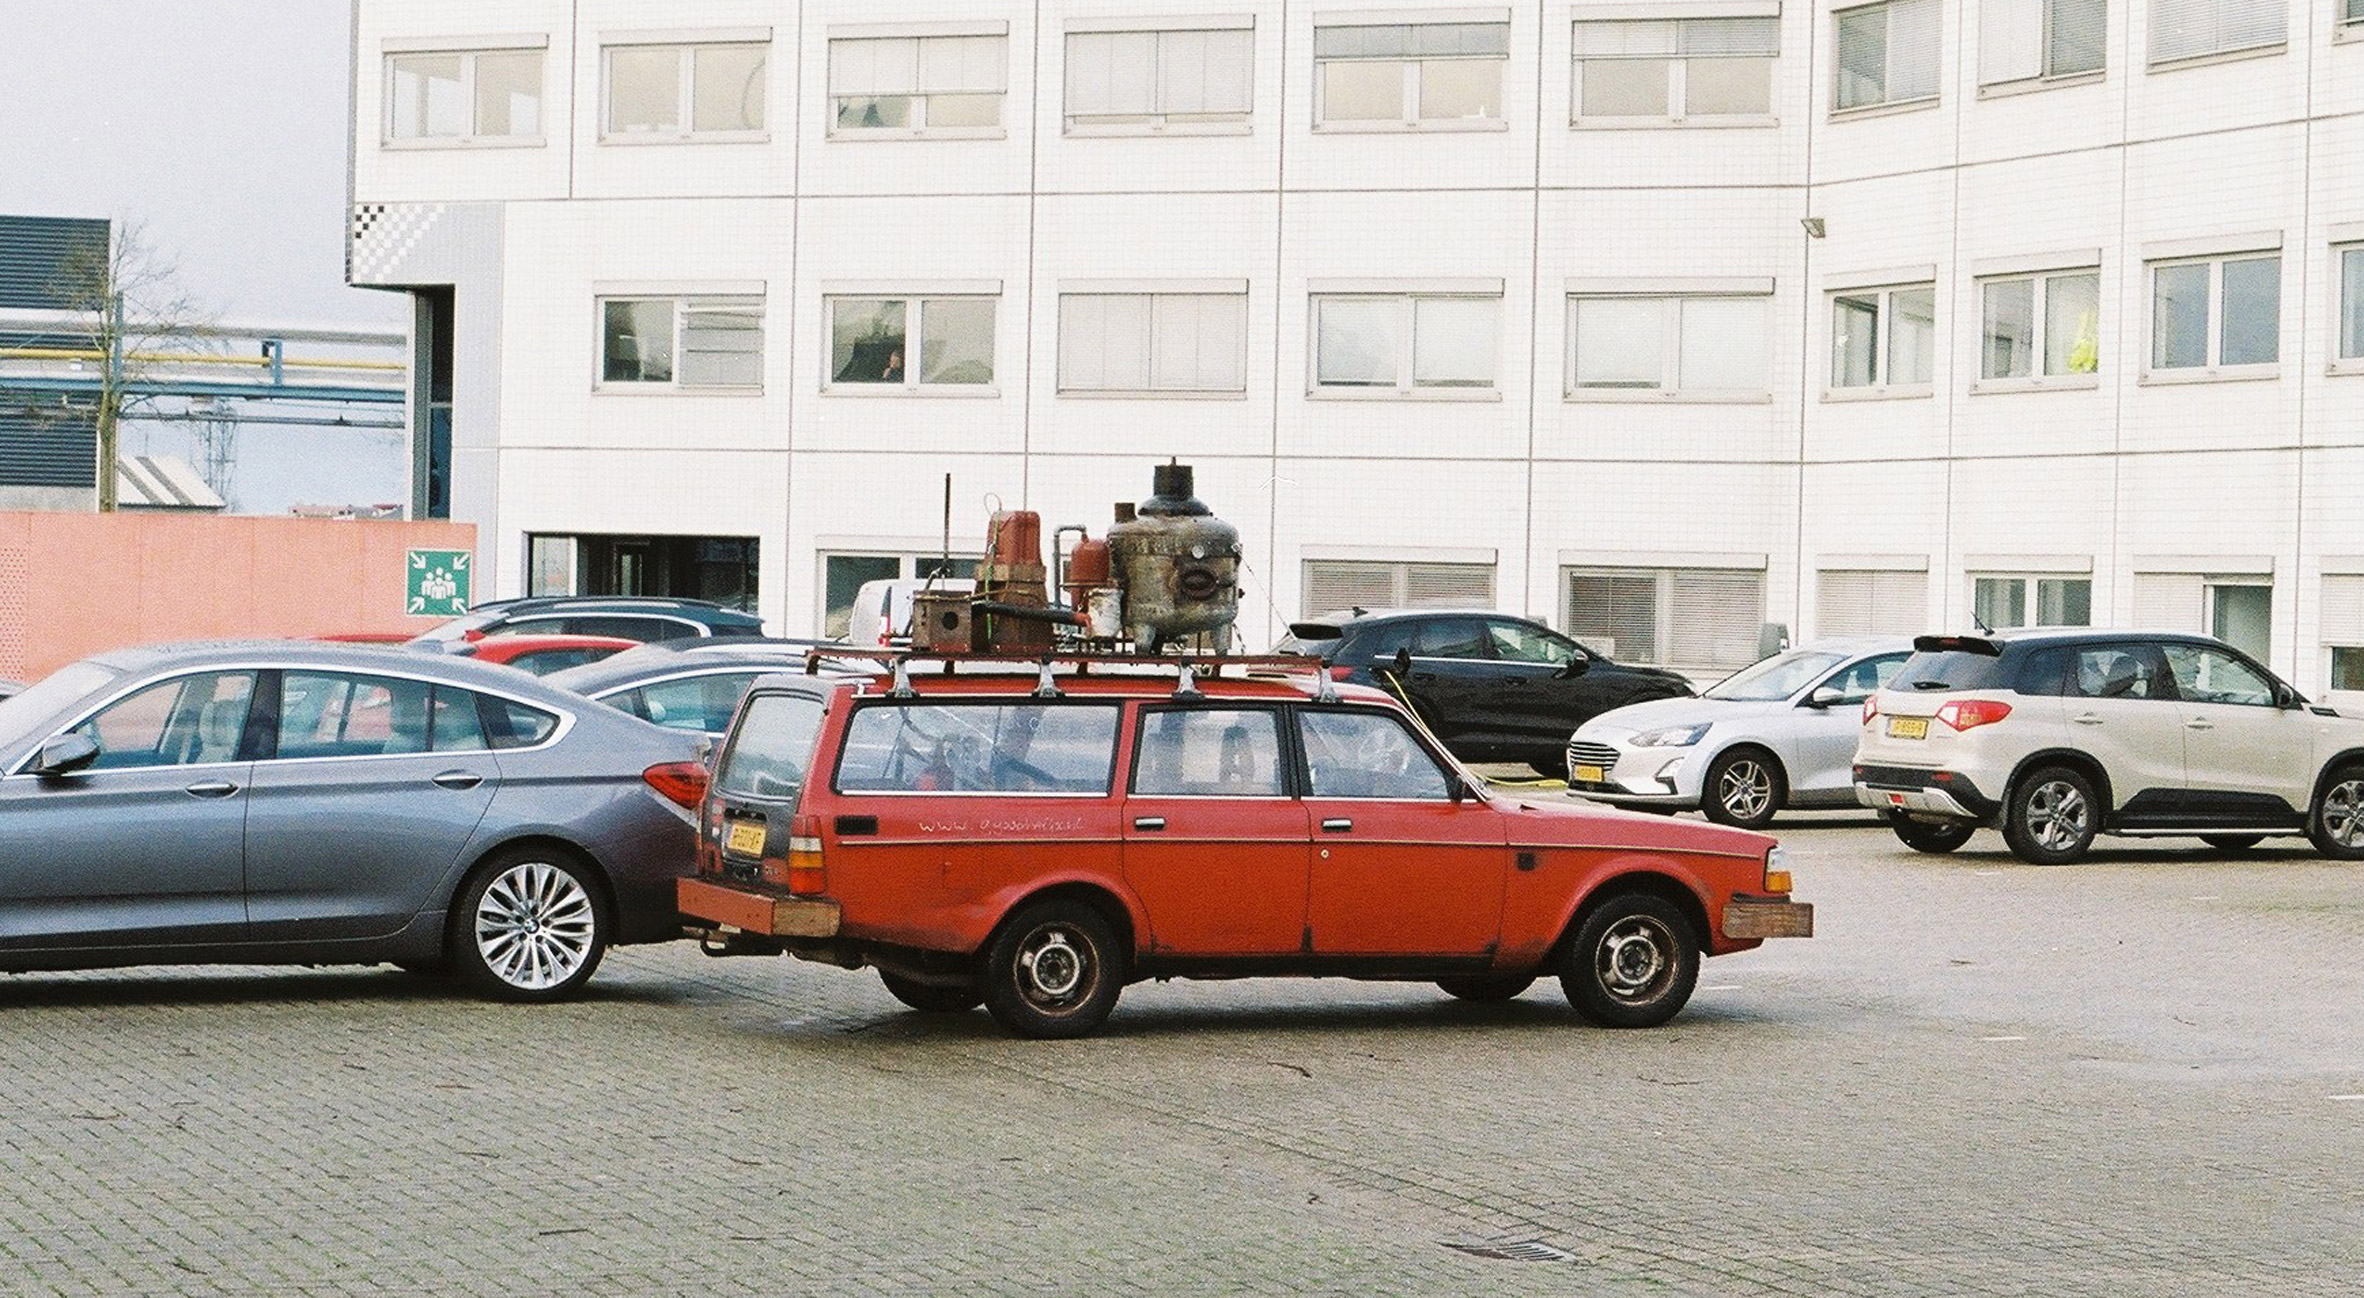 Photo of an old red Volvo with an elaborate contraption on top parked in a car park in front of an apartment building